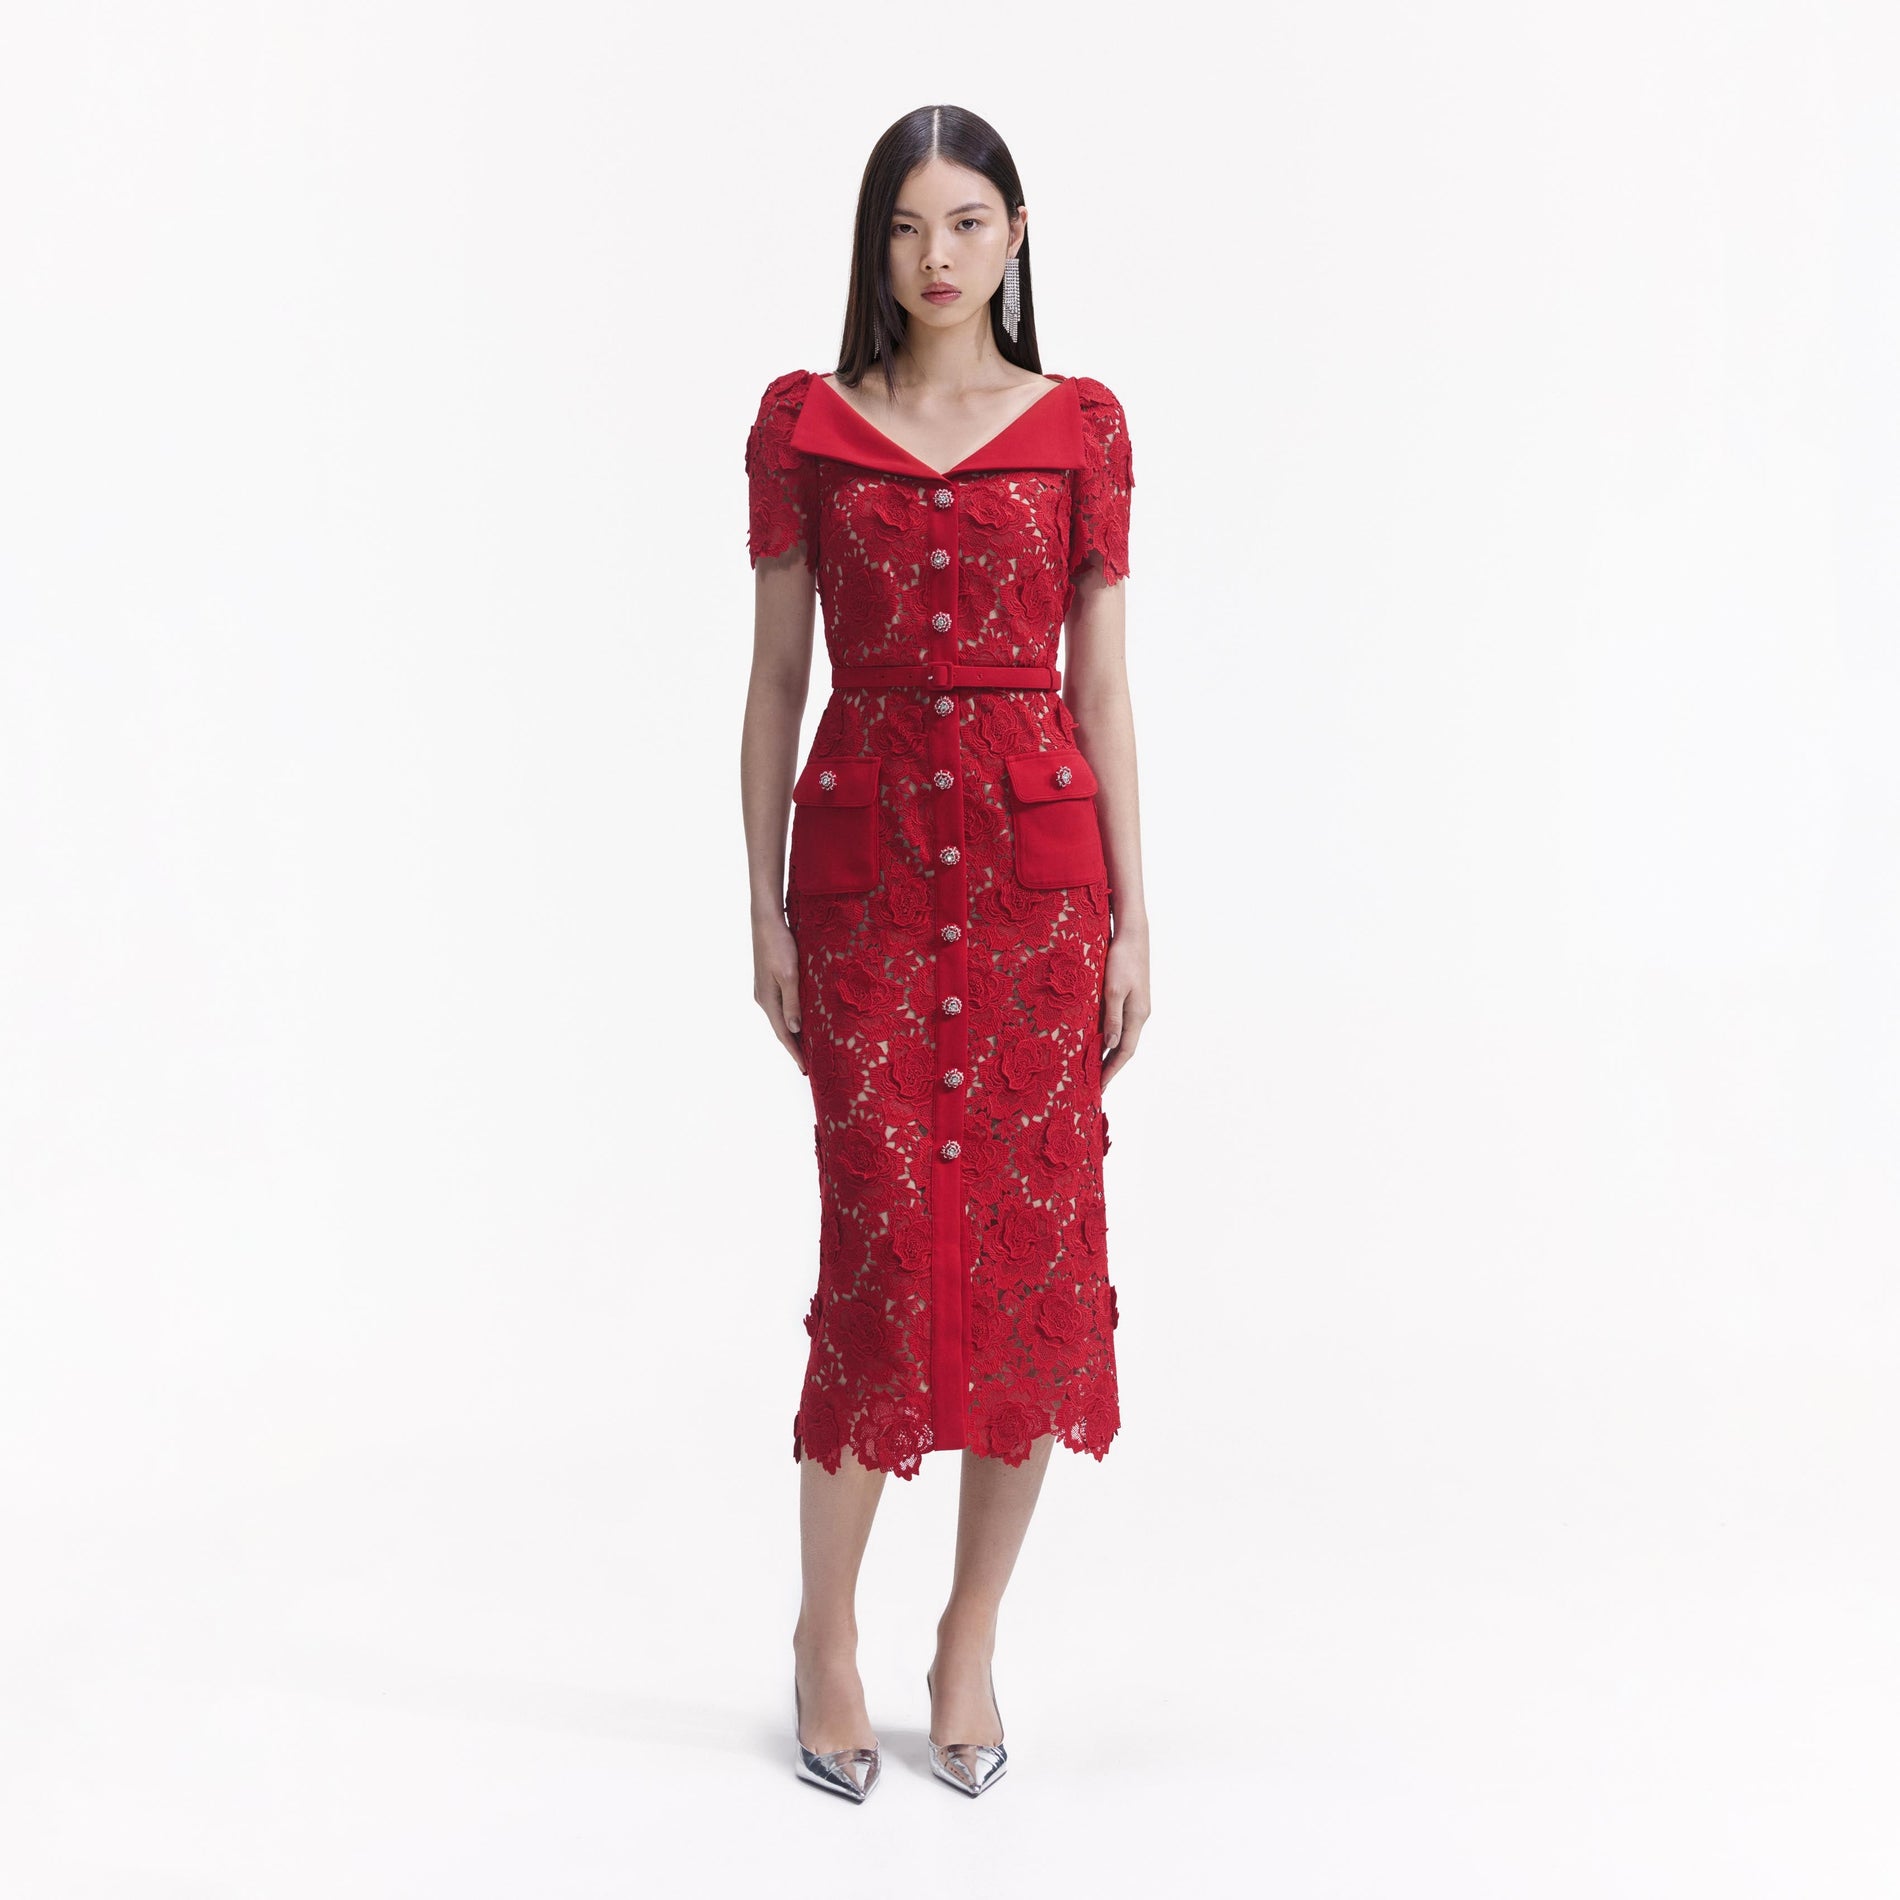 A Woman wearing the Red Lace Open Neck Midi Dress